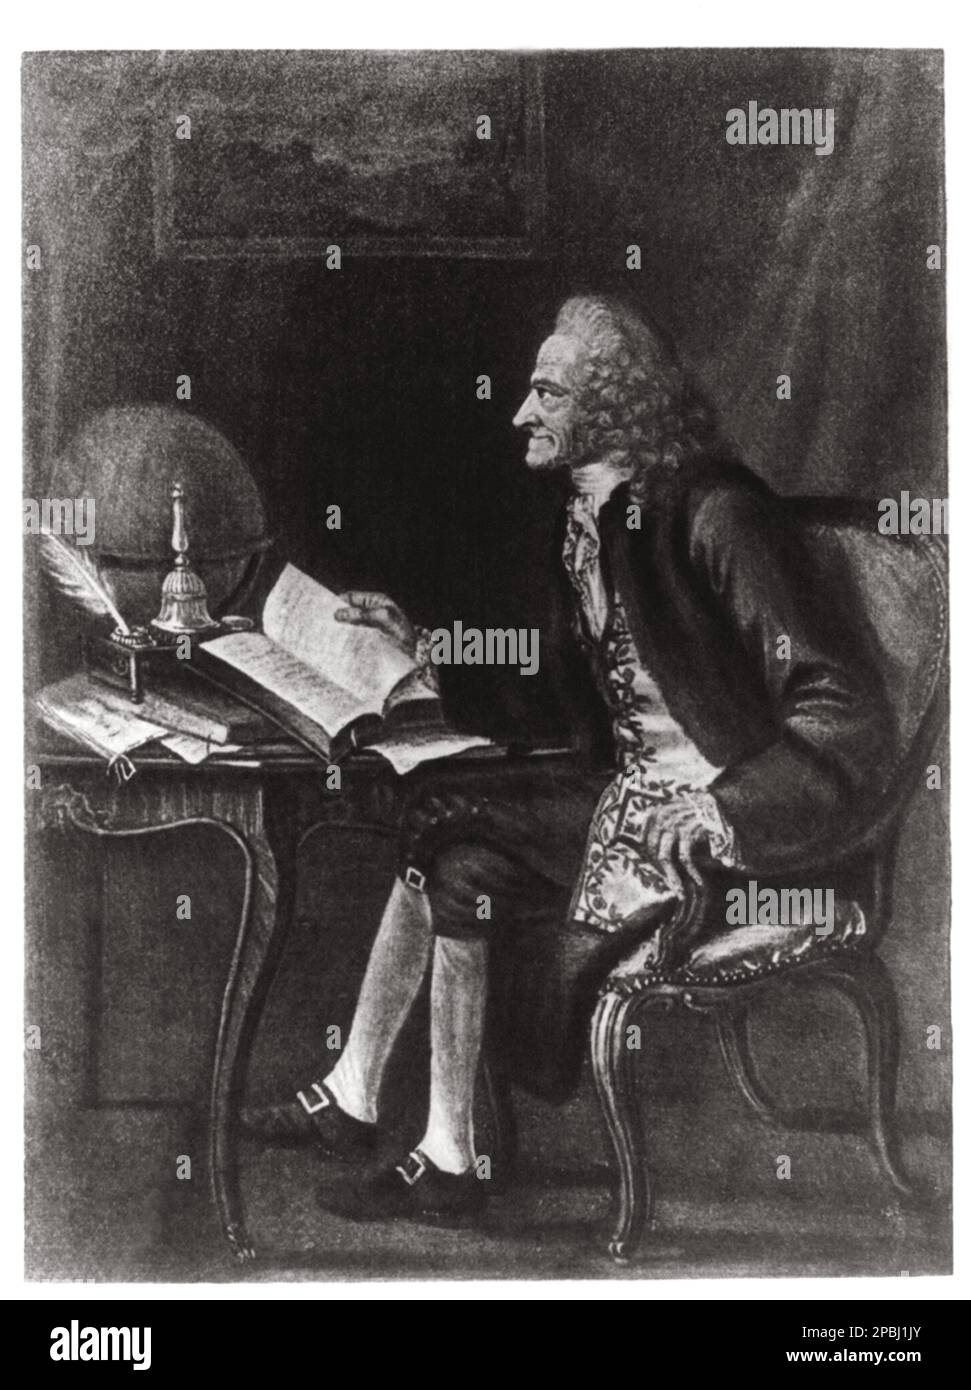 Francois-Marie Arouet ( 1694 – 1778 ), better known by the pen name VOLTAIRE , was a French Enlightenment writer, essayist, deist and philosopher . Engraving after the painting  by Louis Carrogis , called Carmontelle . - FILOSOFO - FILOSOFIA - PHILOSOPHY  - engraving - incisione - wig - parrucca - profilo - profile - desk - scrivania - scrittoio - reader - lettore - book - libro  ----  Archivio GBB Stock Photo